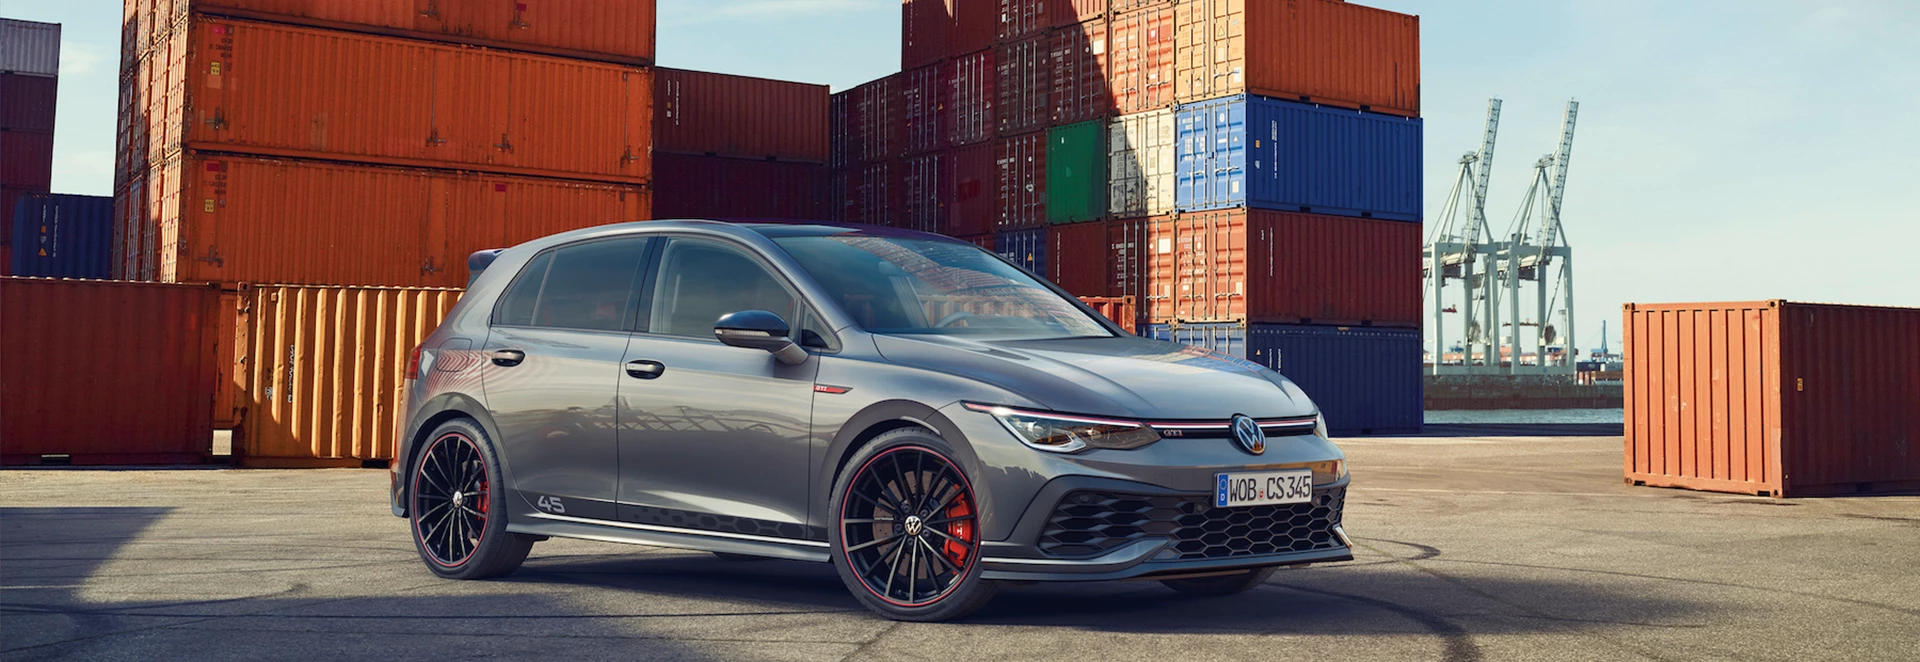 Volkswagen marks Golf GTI’s 45th anniversary with new special edition 